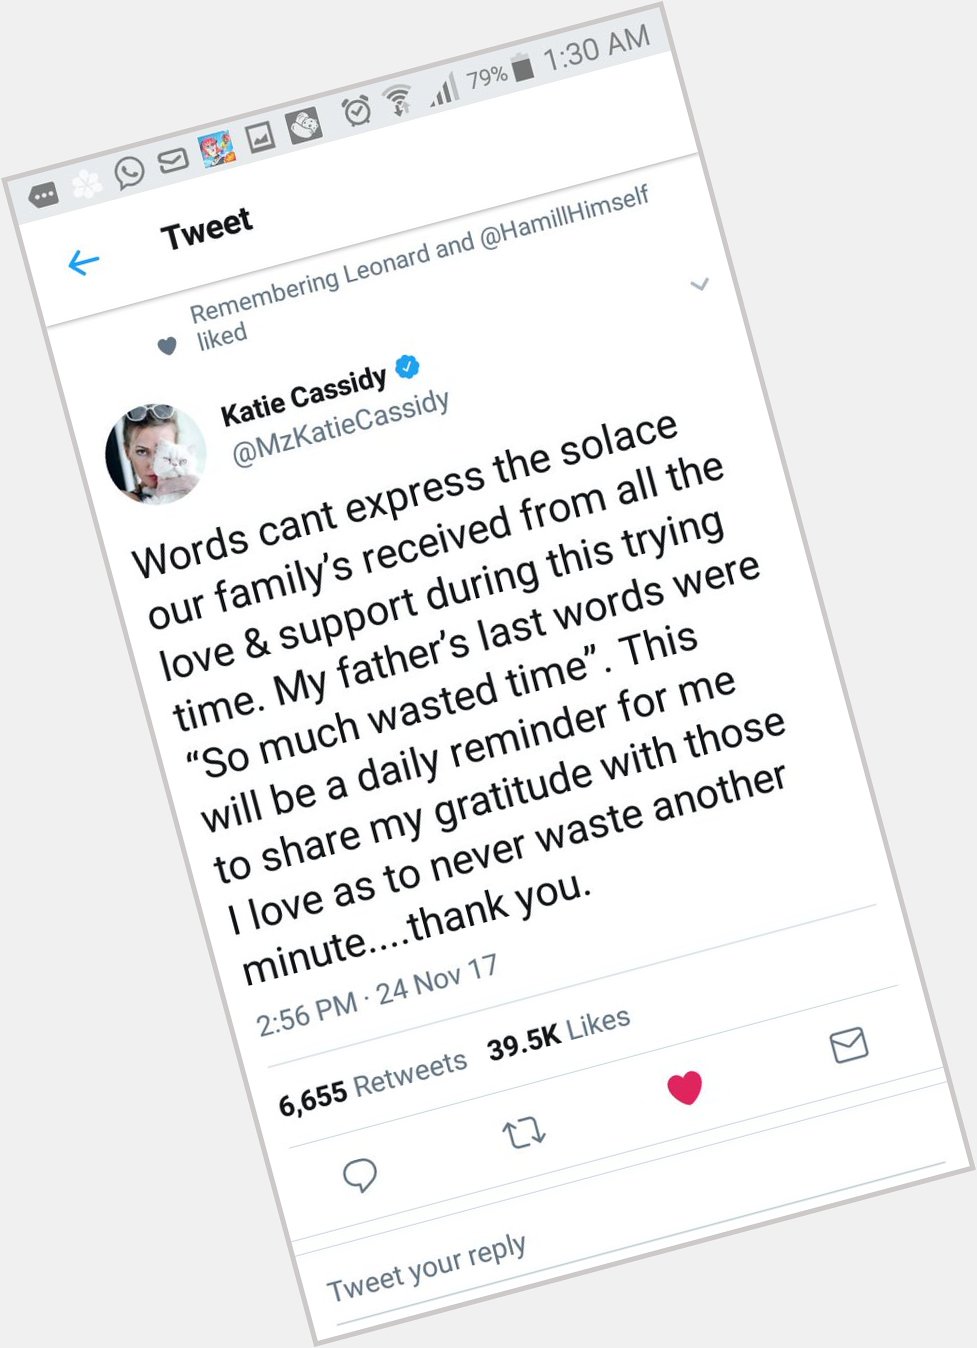  I took a screen shot of his daughter\s message. I will never delete it. Happy birthday, David Cassidy. 